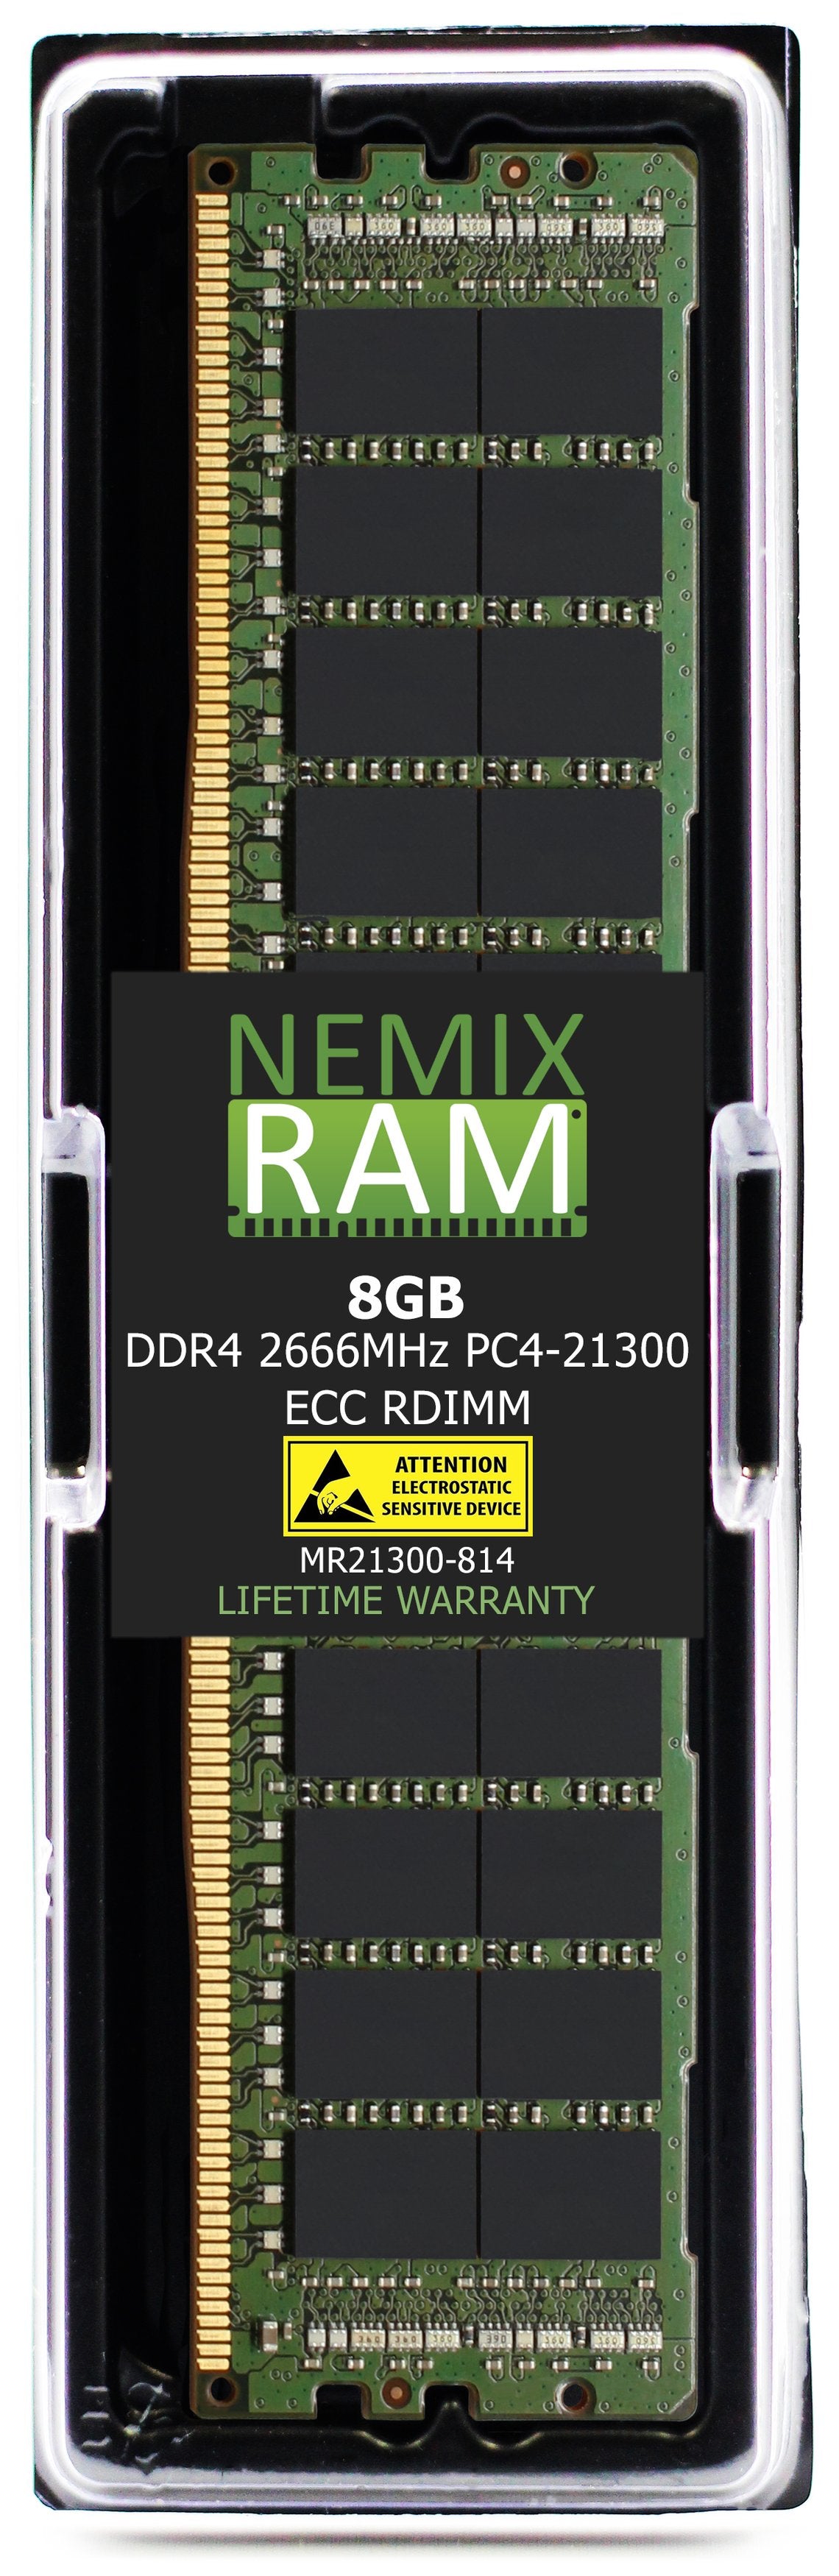 8GB DDR4 2666MHZ PC4-21300 RDIMM Compatible with Supermicro MEM-DR412MH-ER29